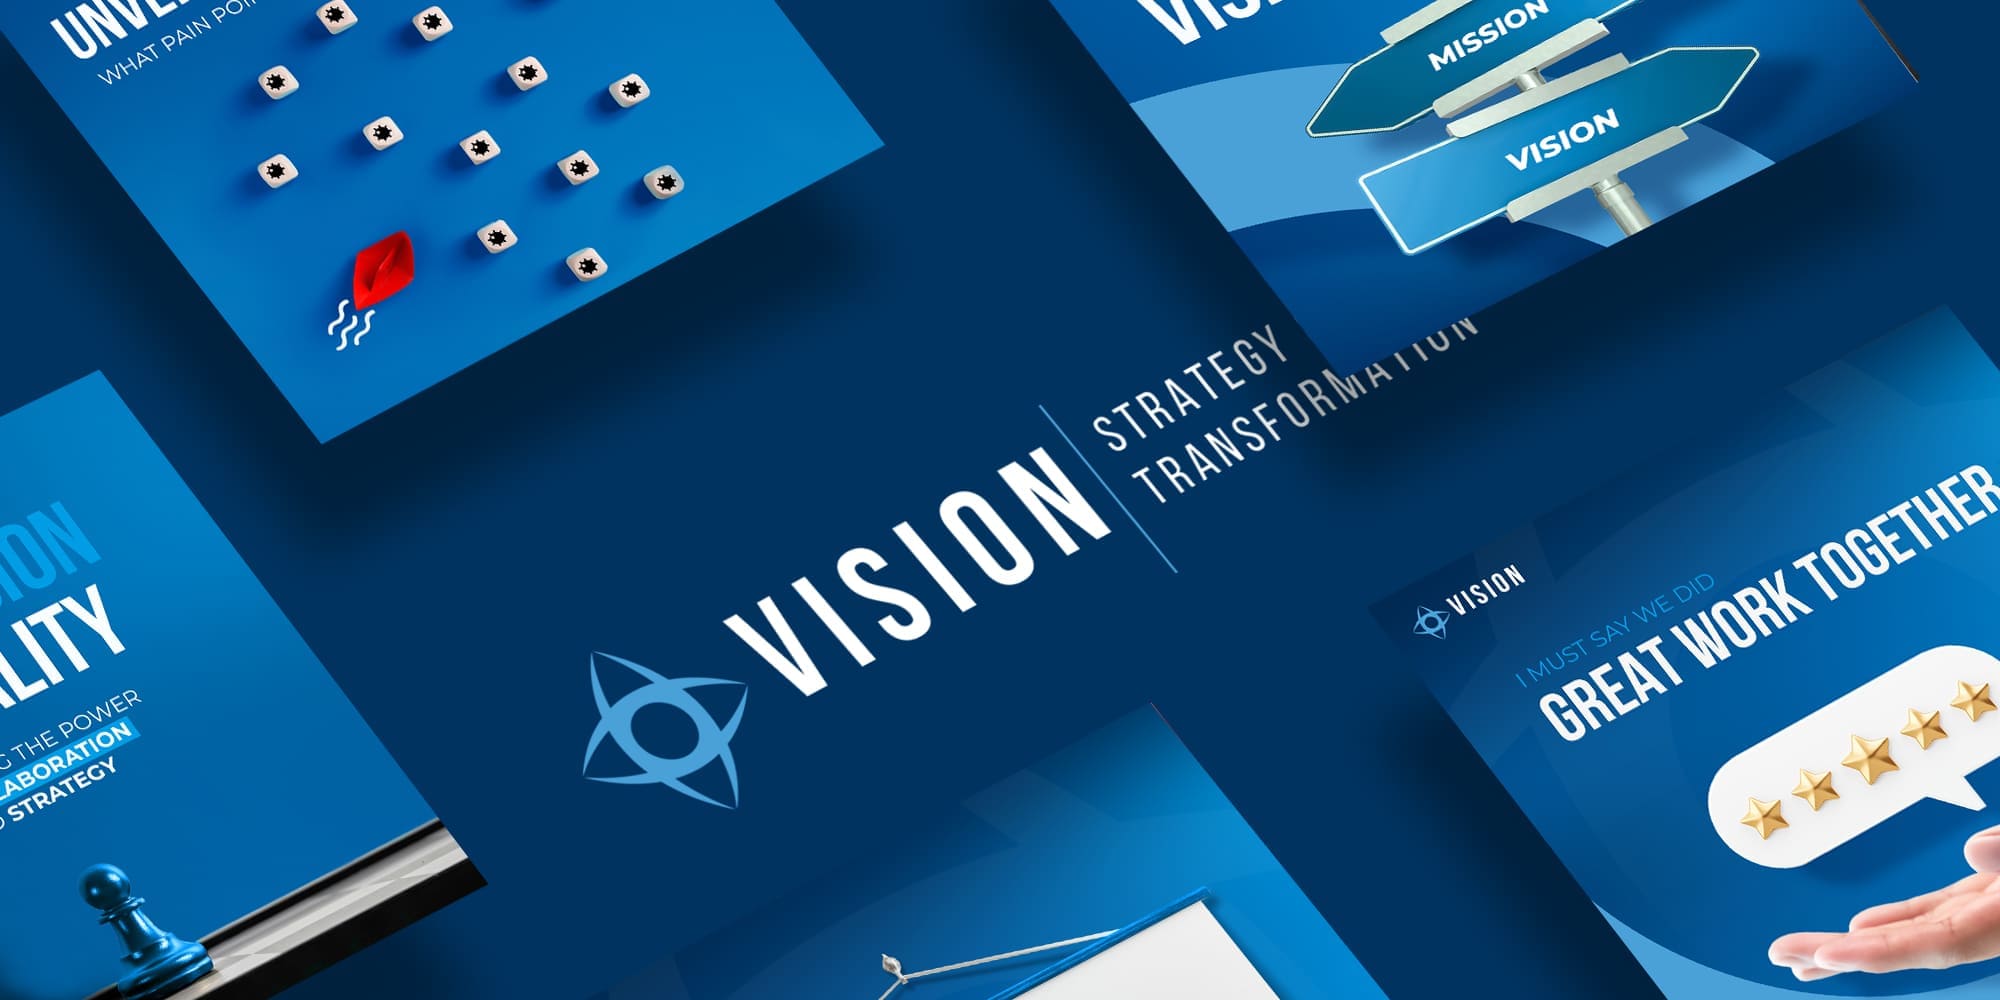 Vision Strategy